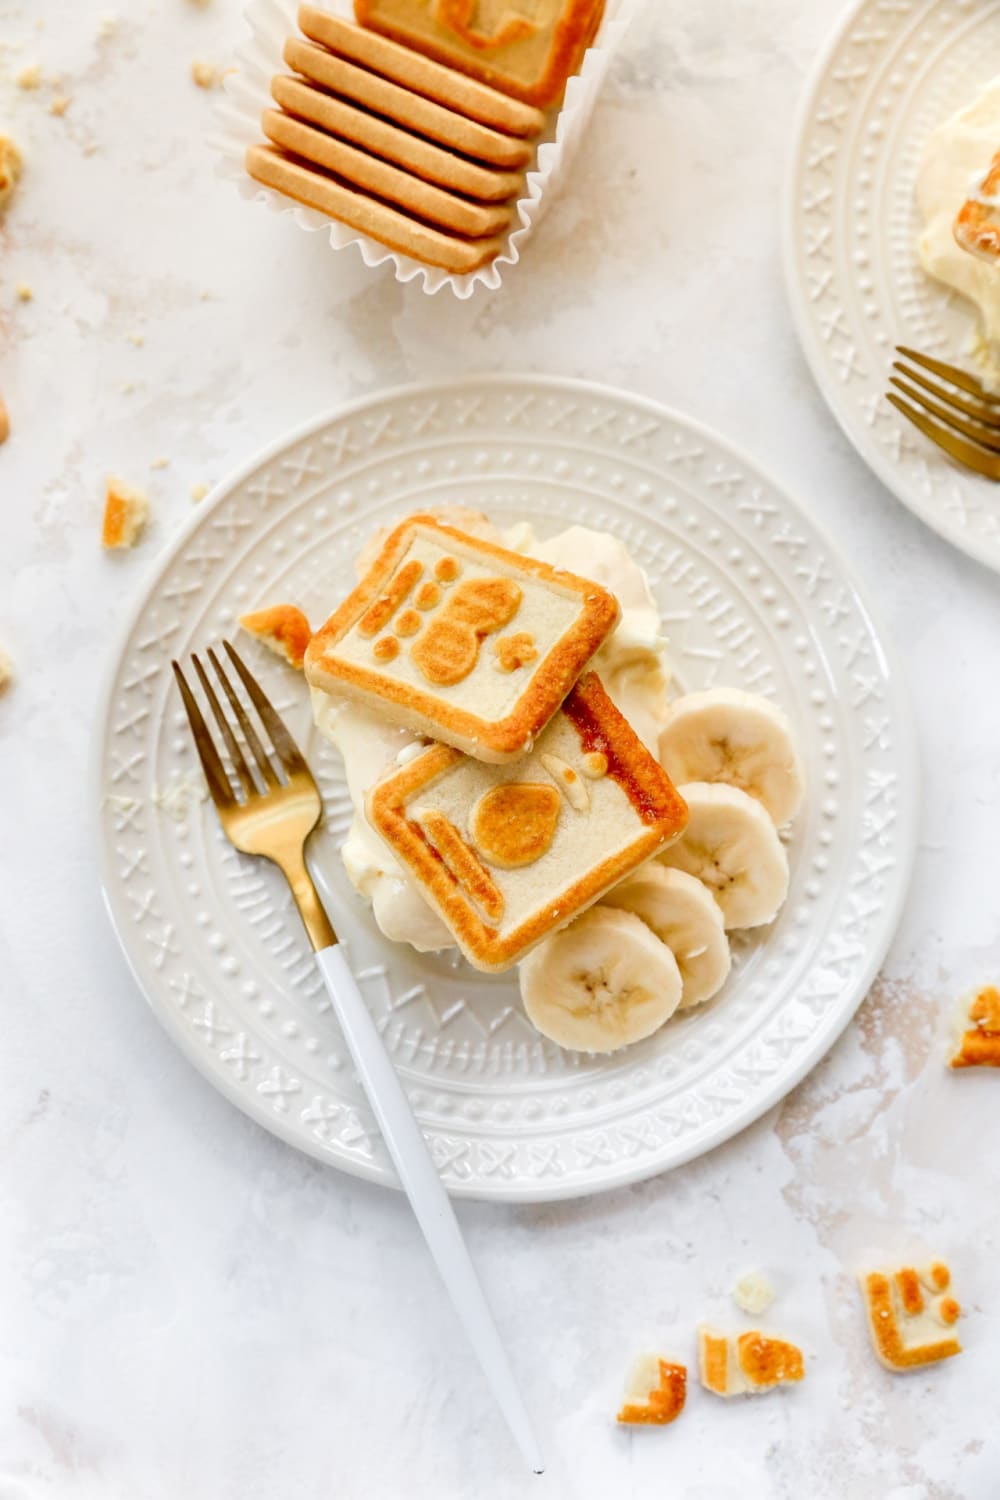 Seriously, guys, this is the BEST Banana Pudding EVER!